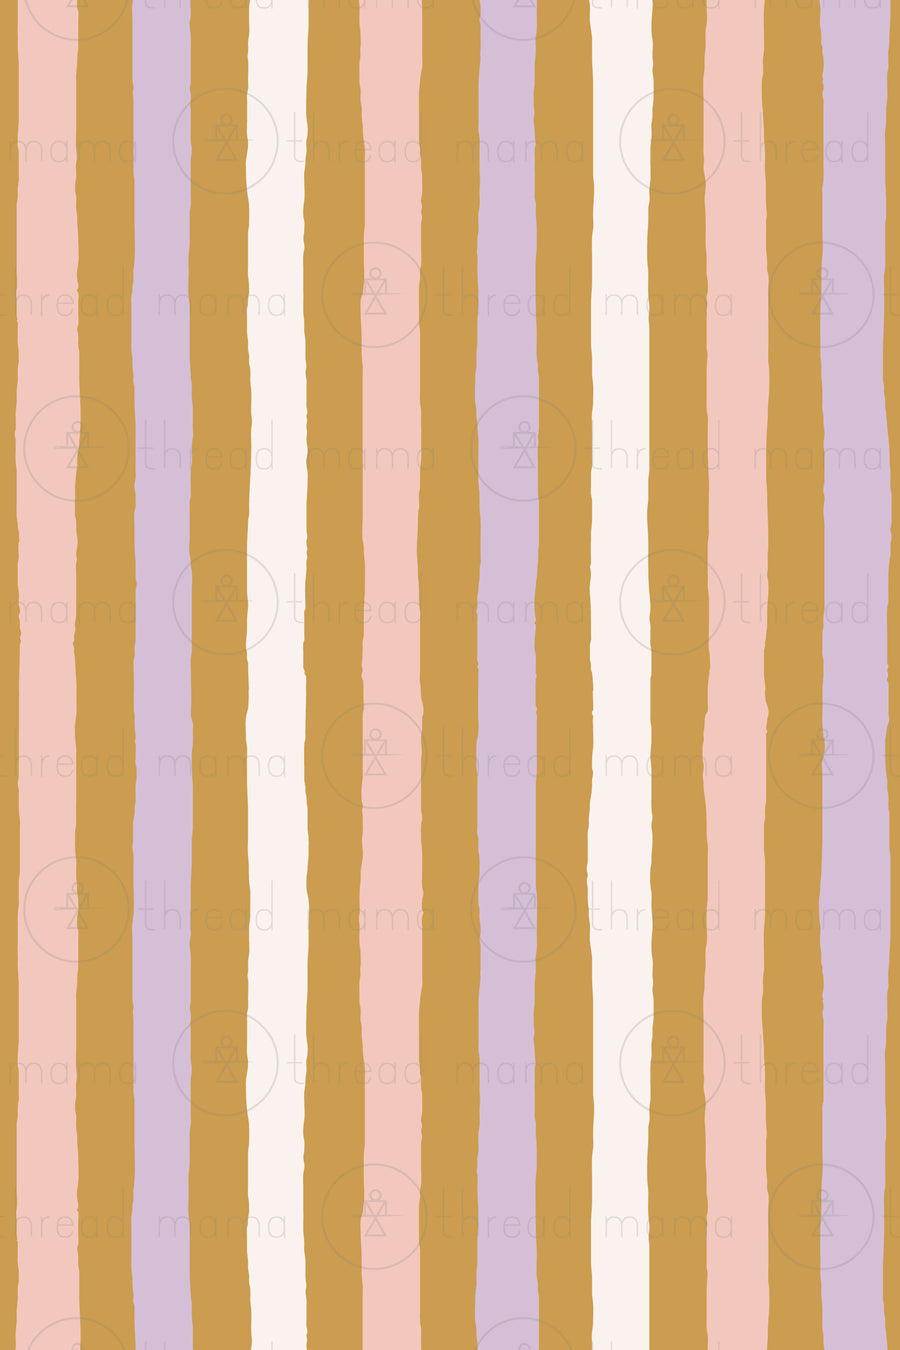 Repeating Pattern 197 (Seamless)